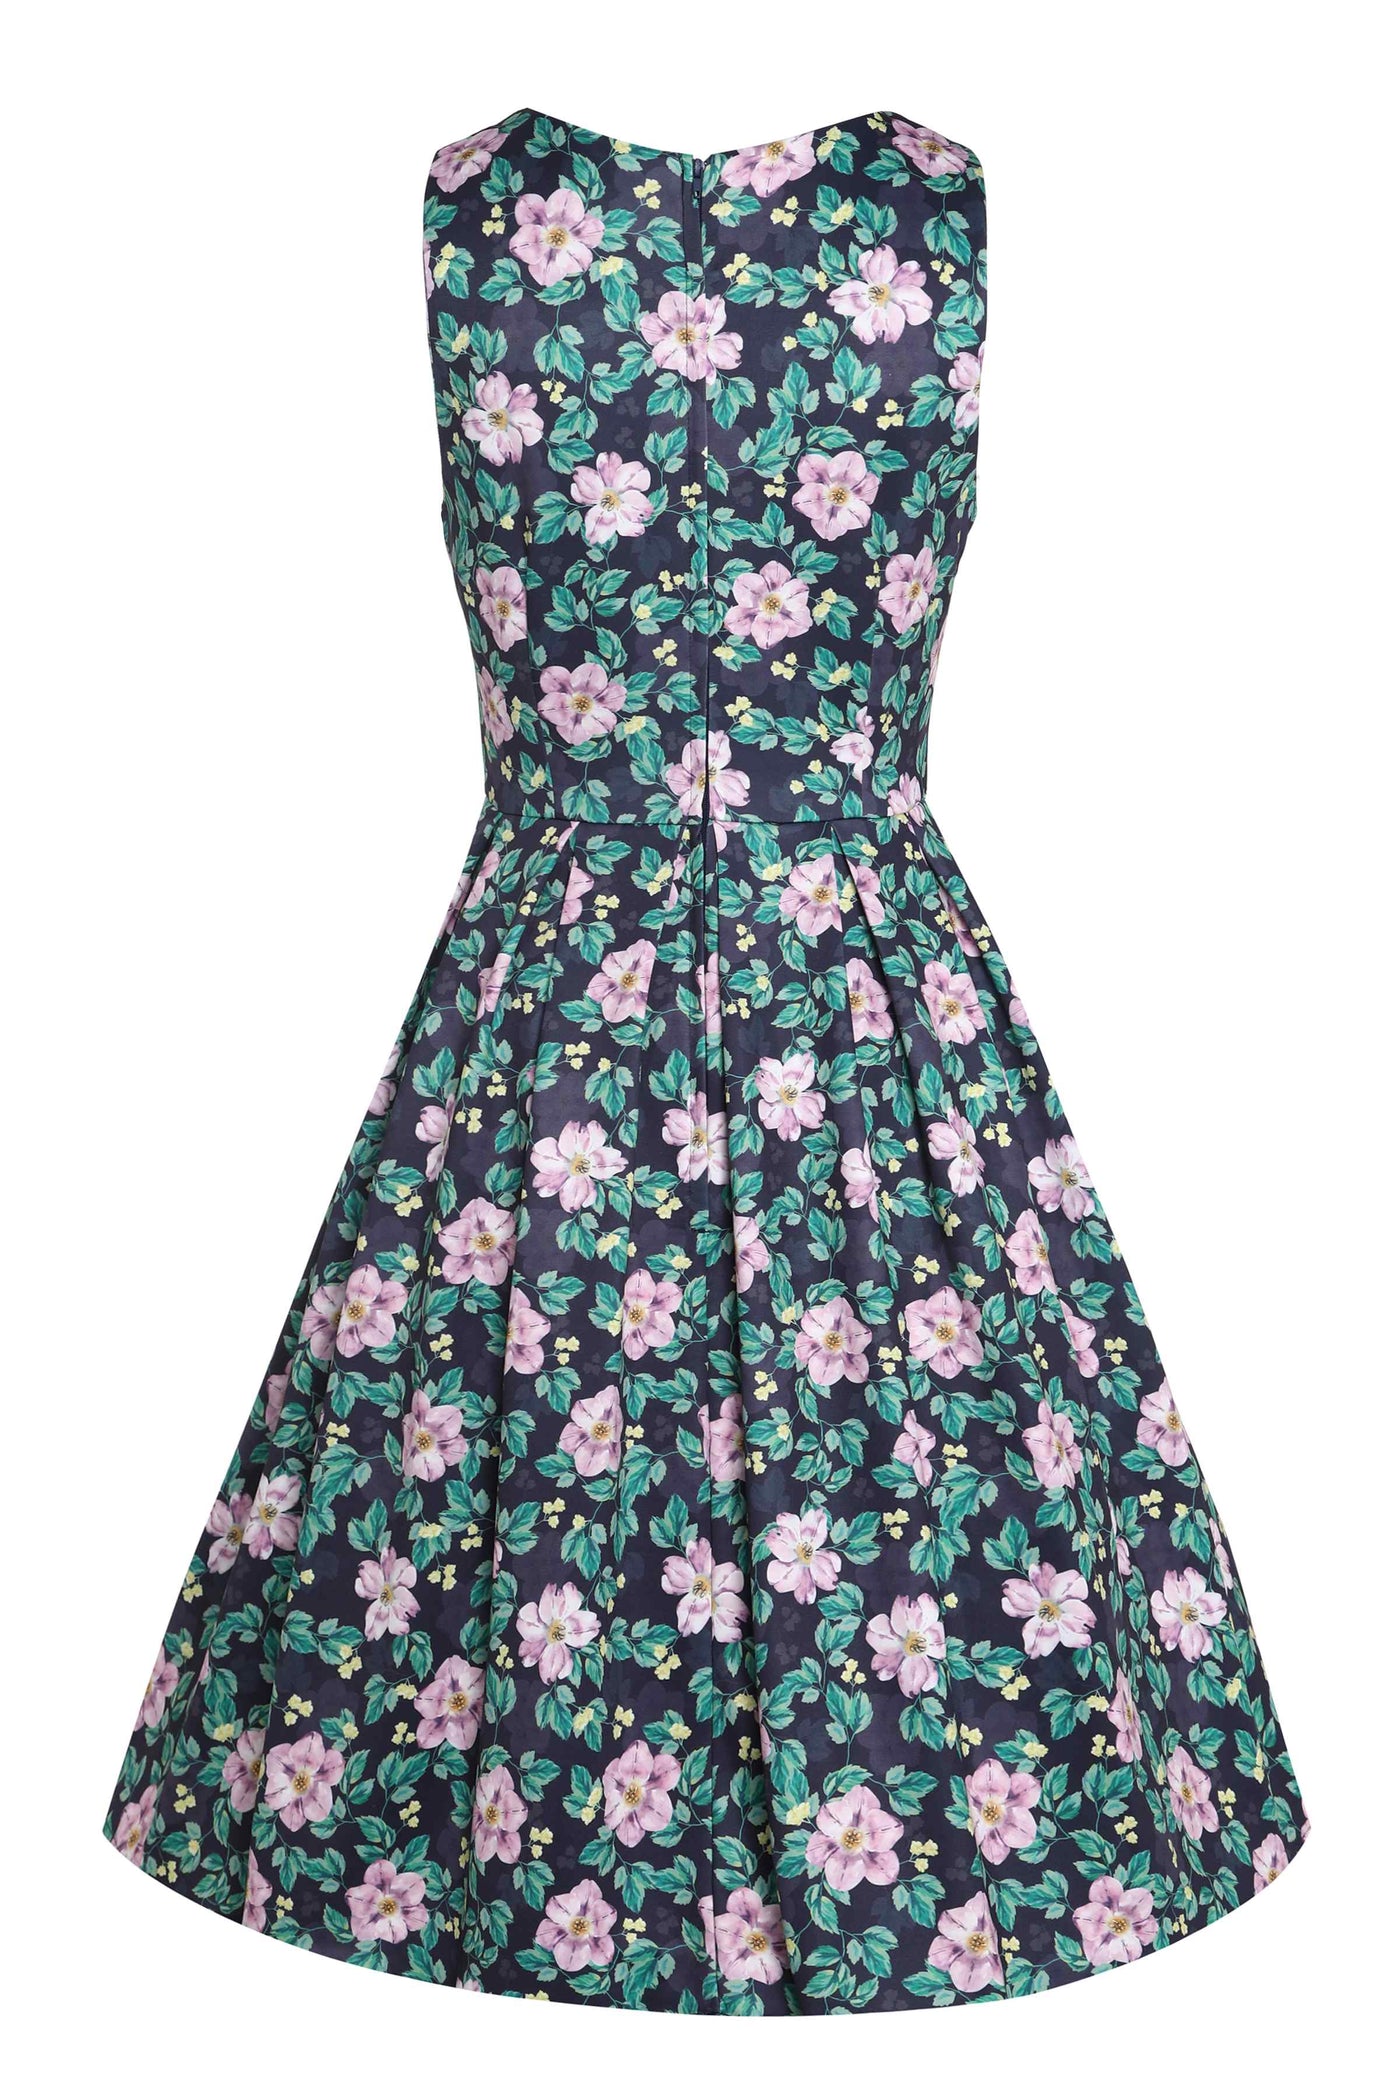 Back  View of Purple Floral Formal Swing Dress